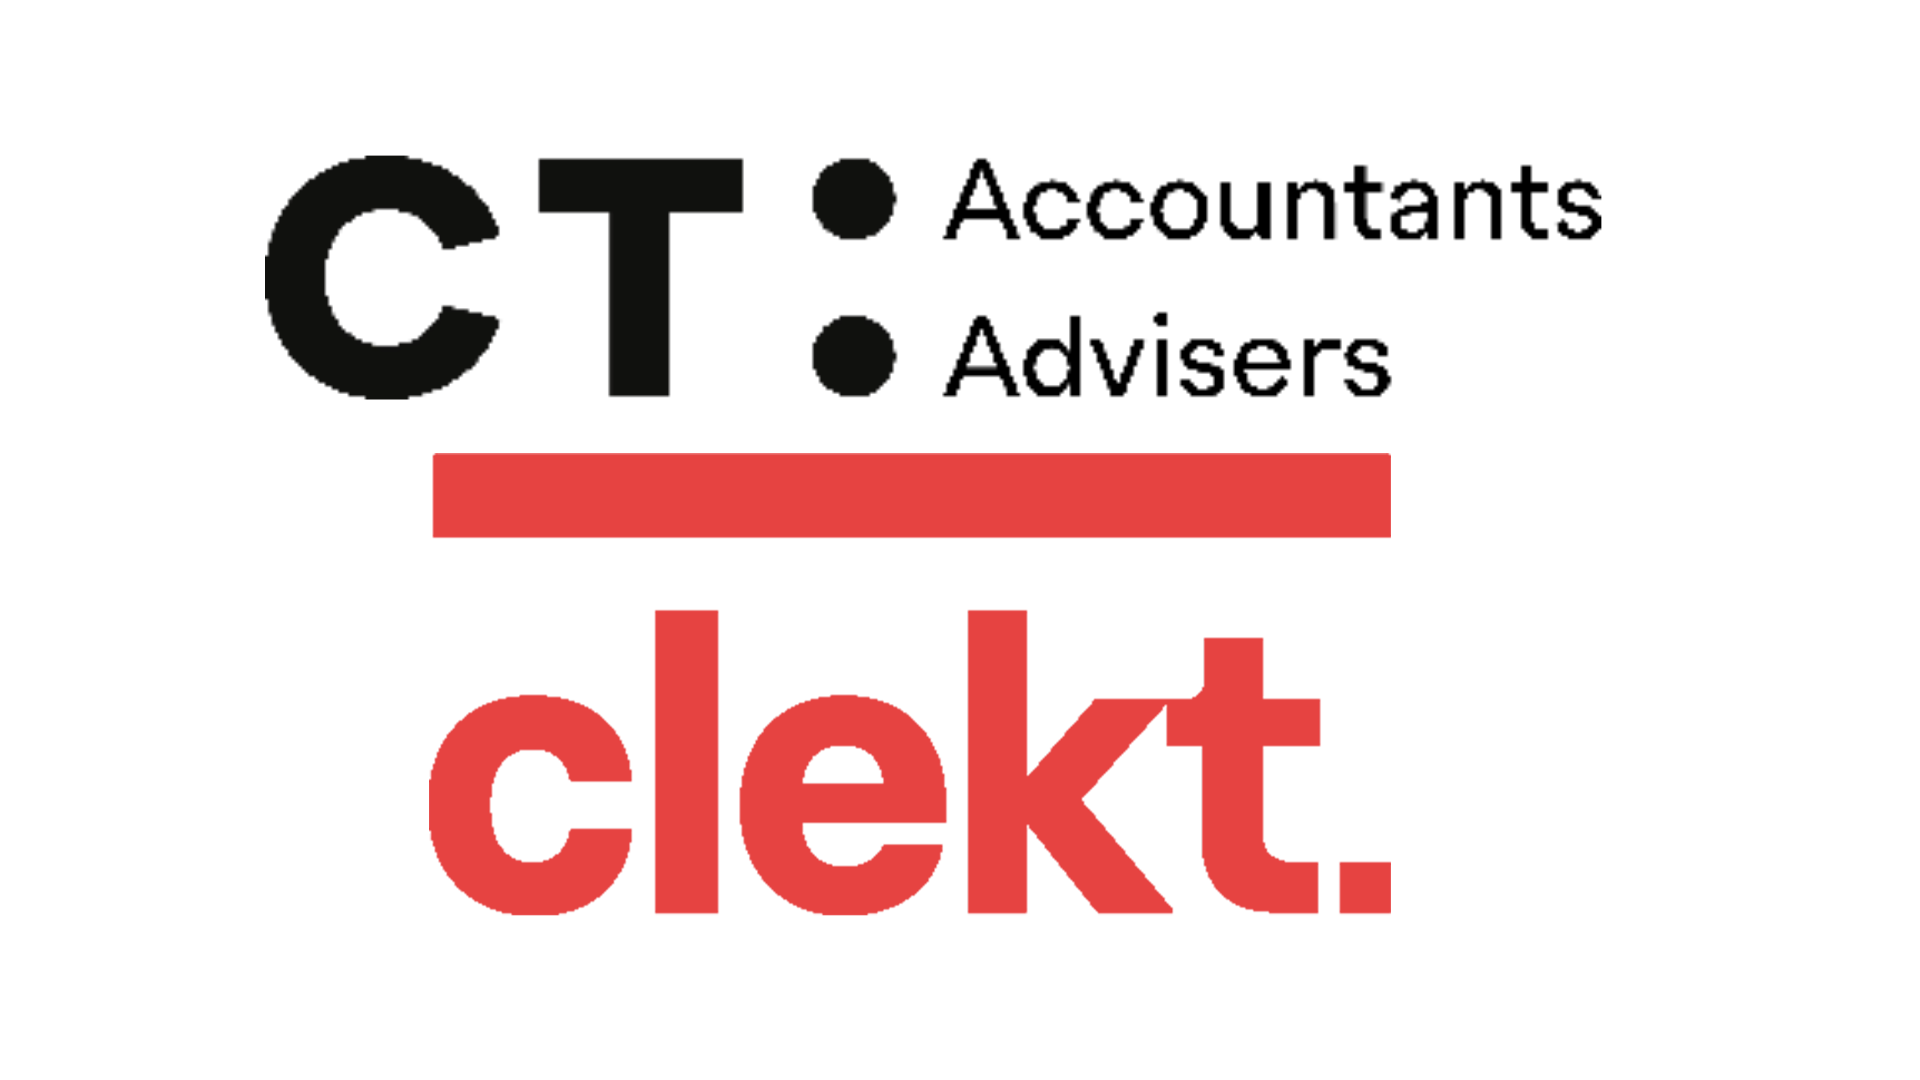 CT and Clekt Logos